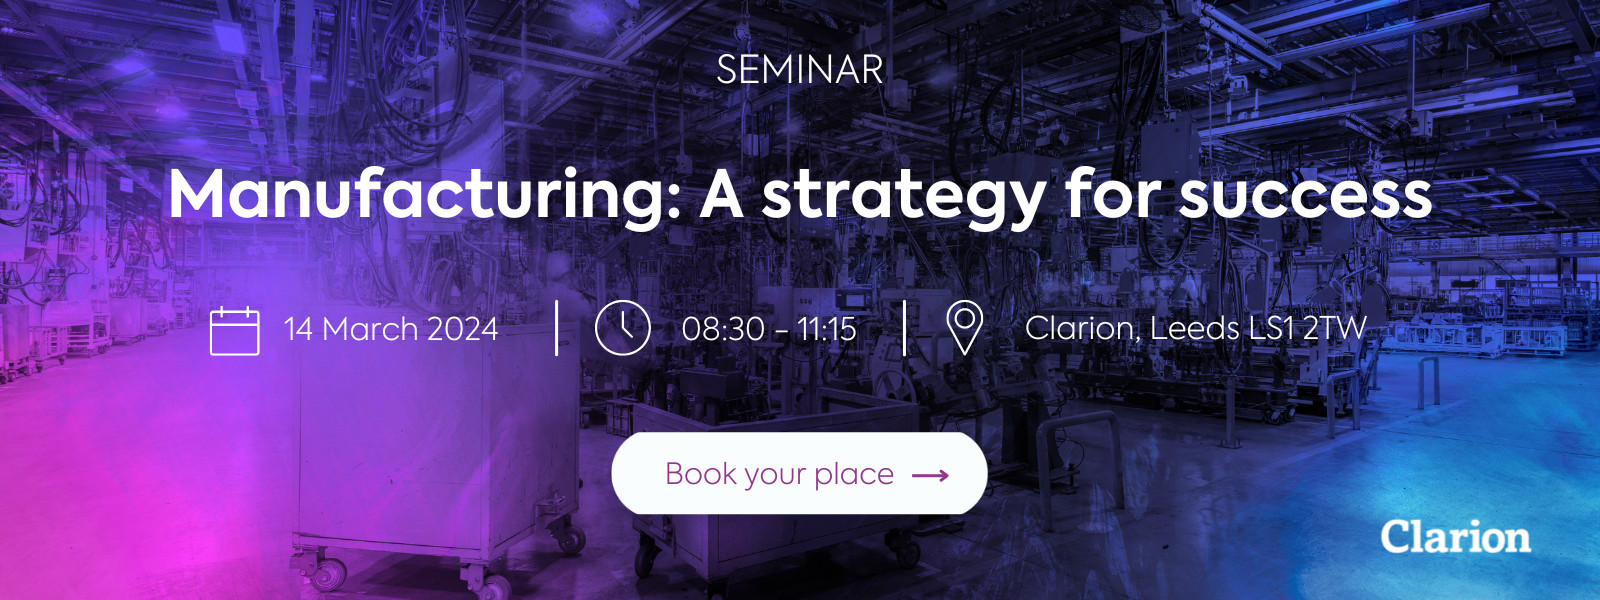 In-Person Event: Manufacturing - A strategy for su...